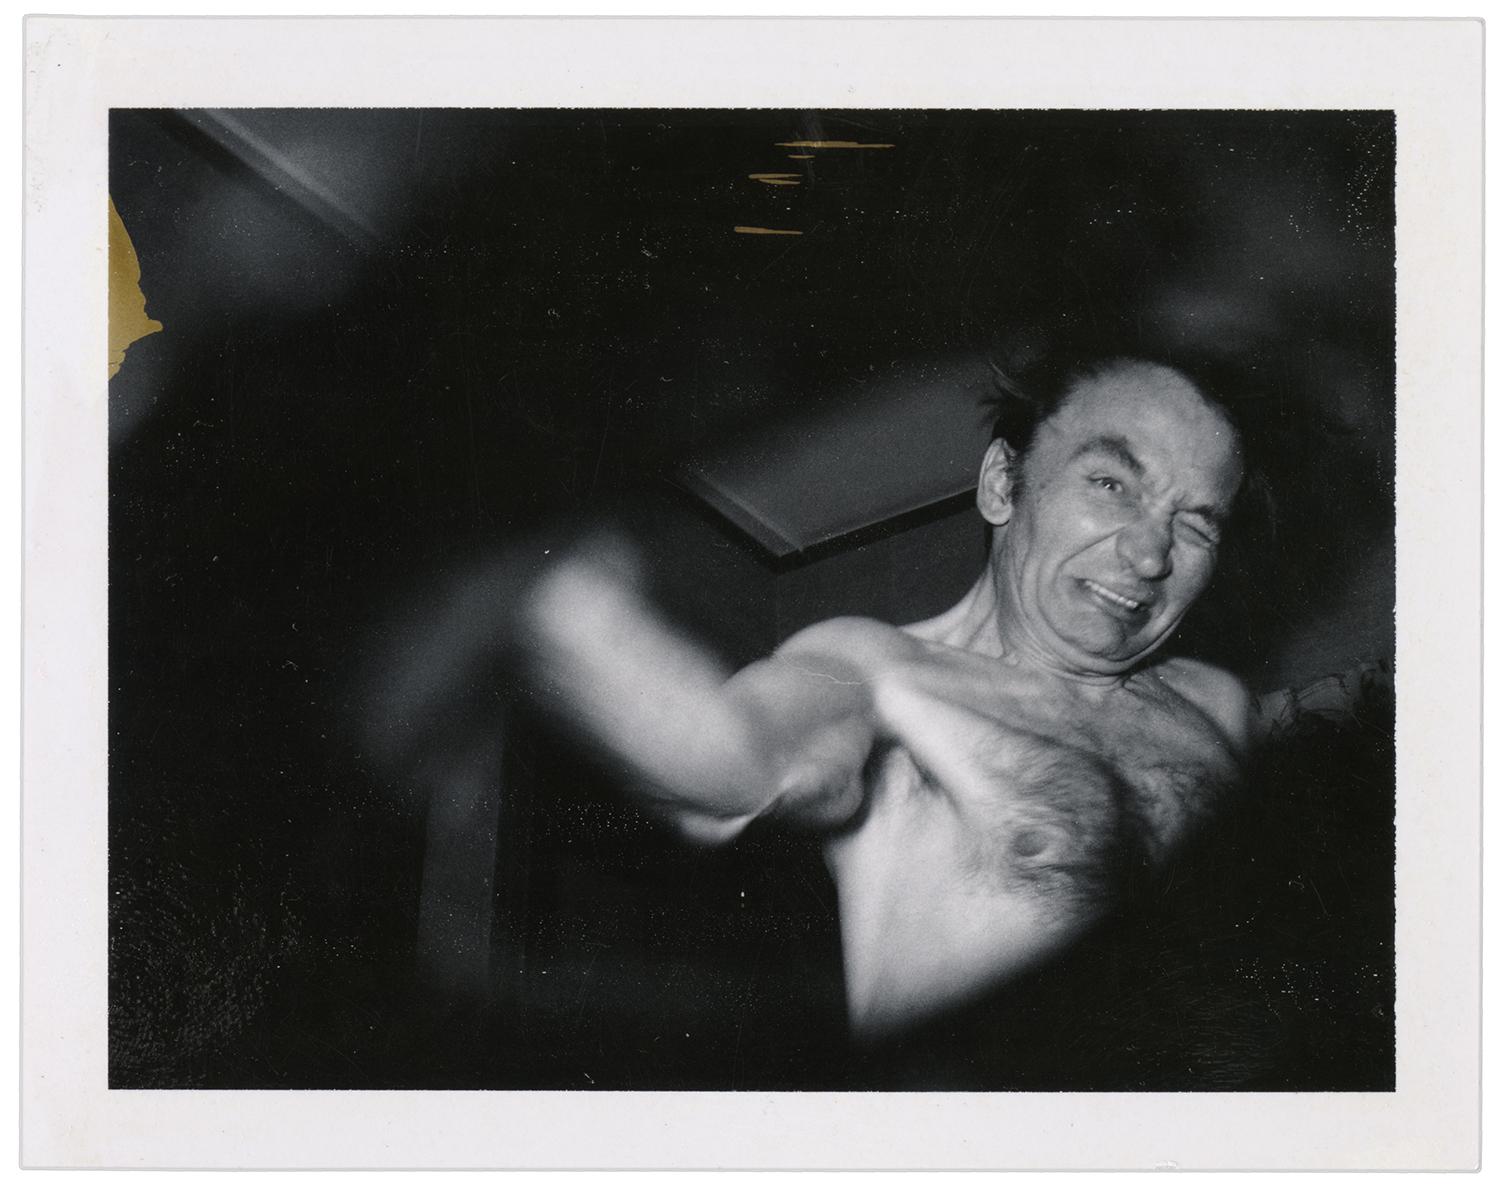 shirtless man, arm outstretched towards lens, strained expression